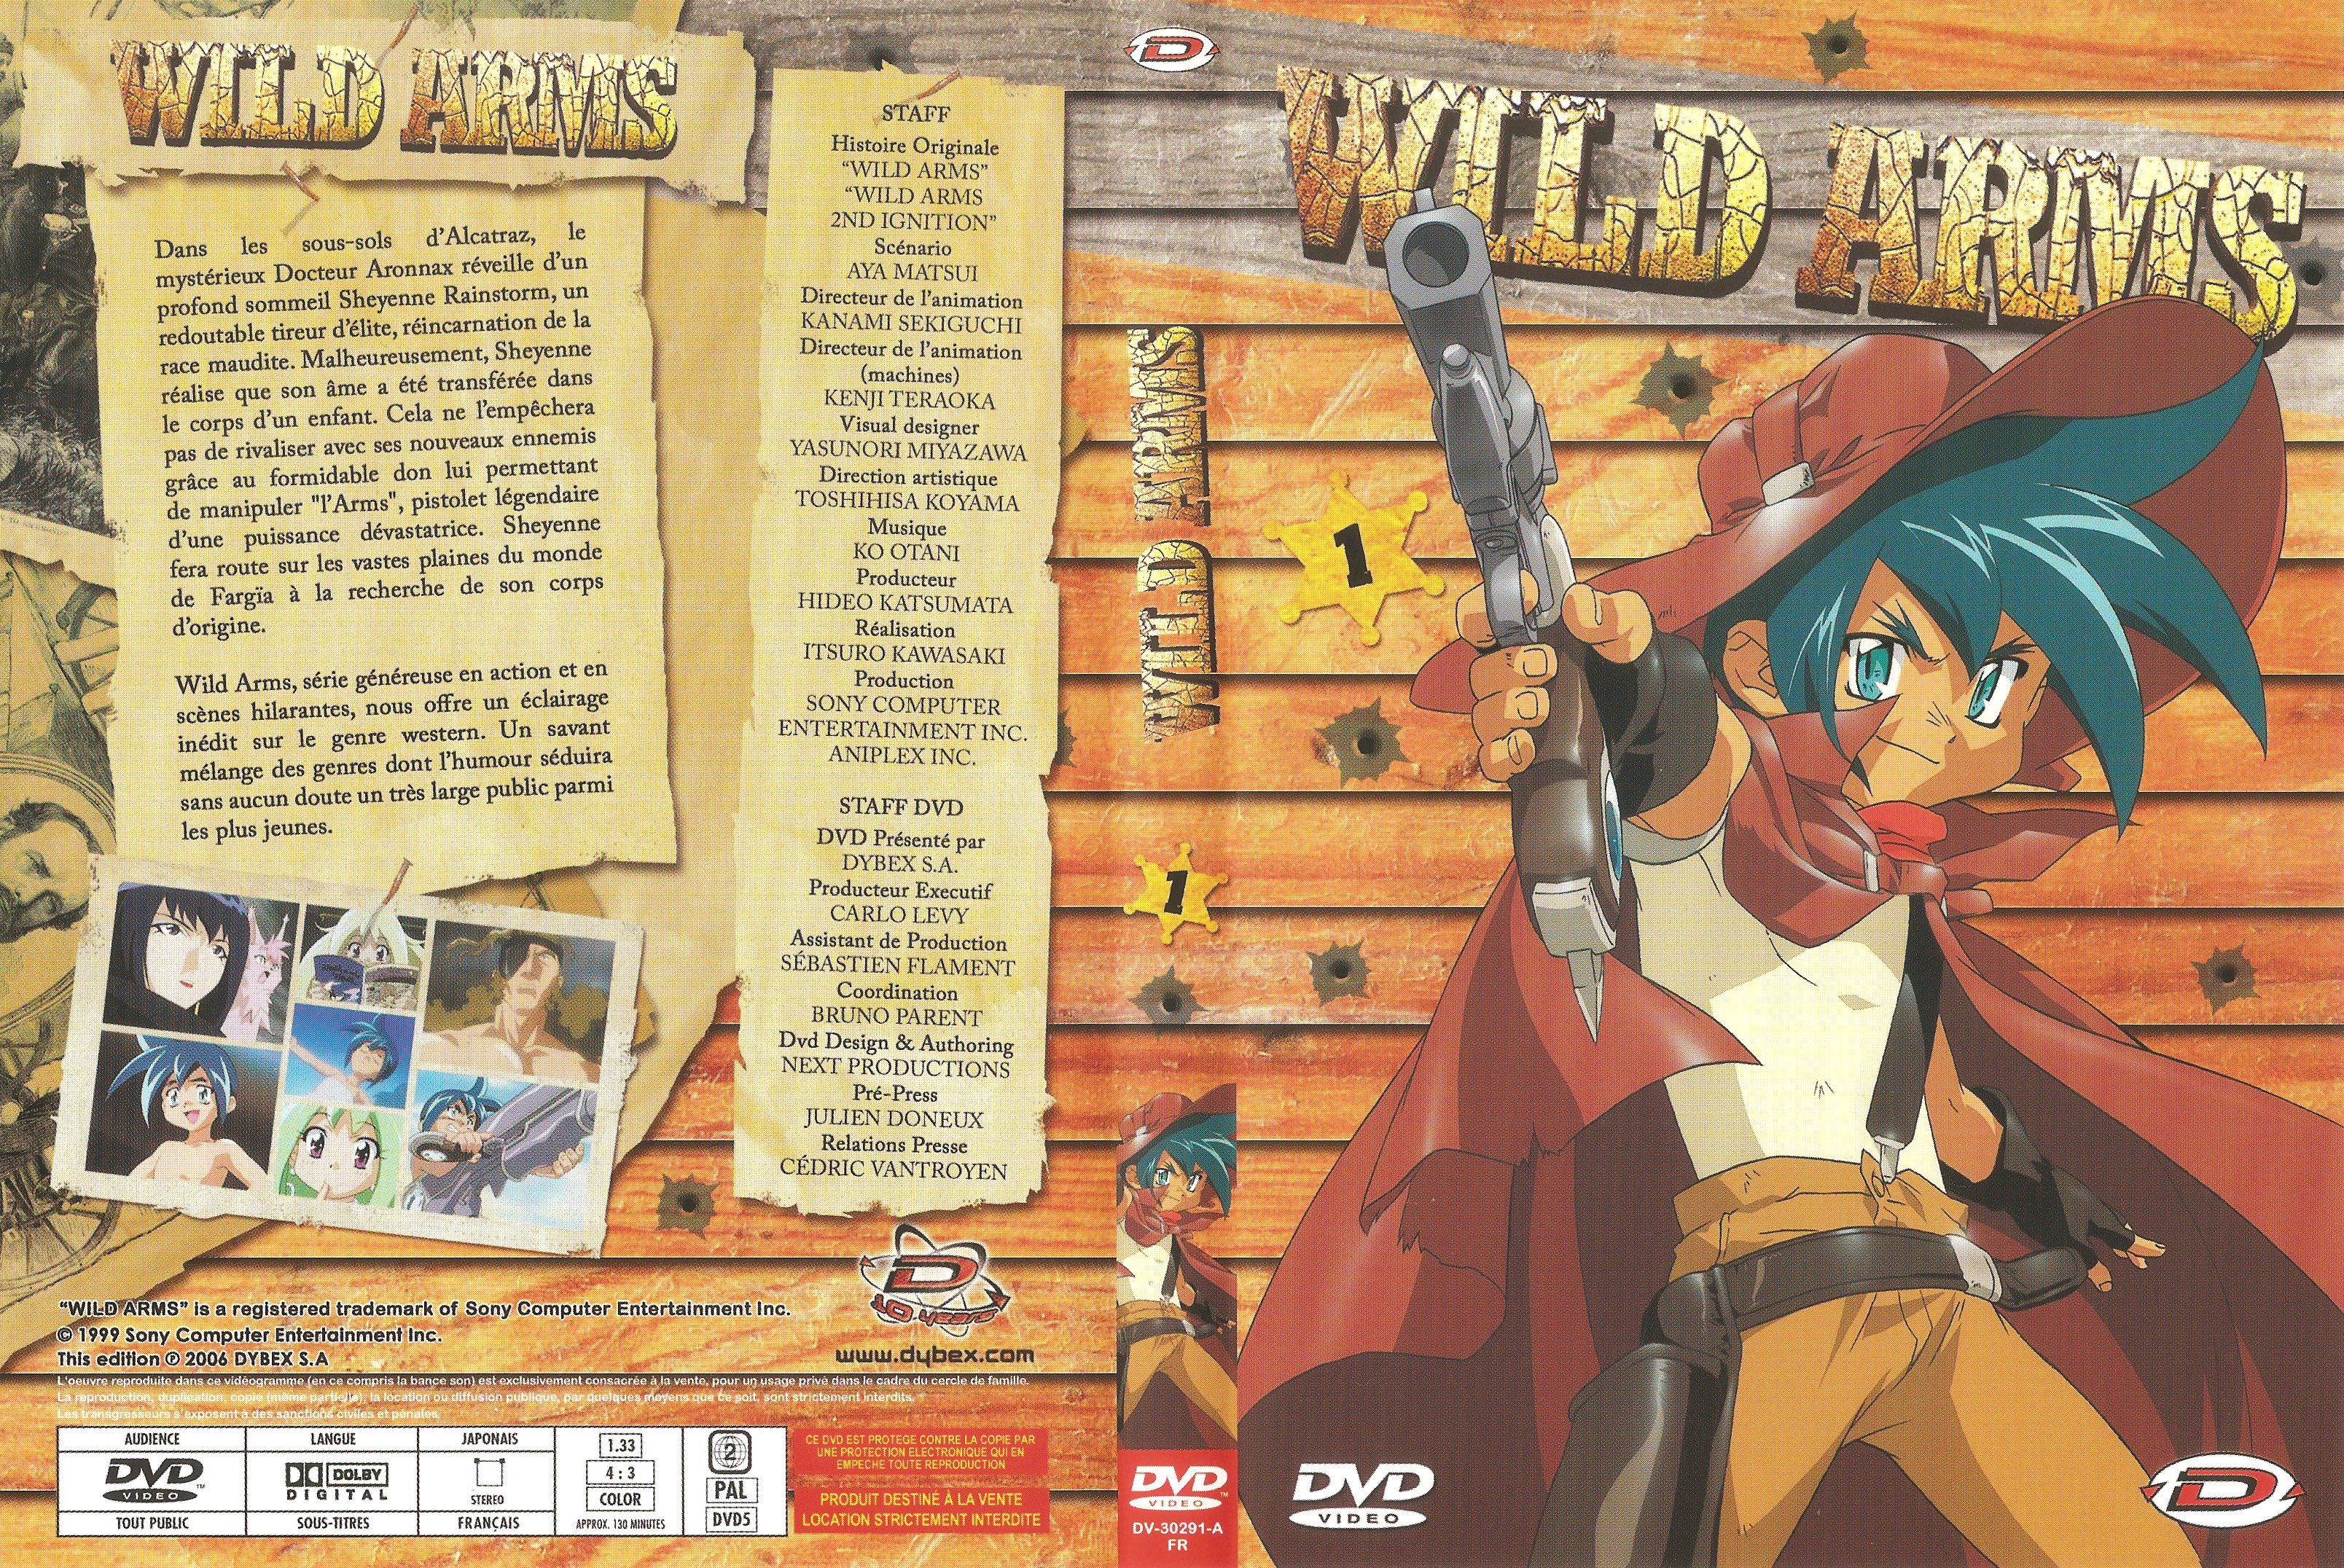 Jaquette DVD Wild Arms vol 1